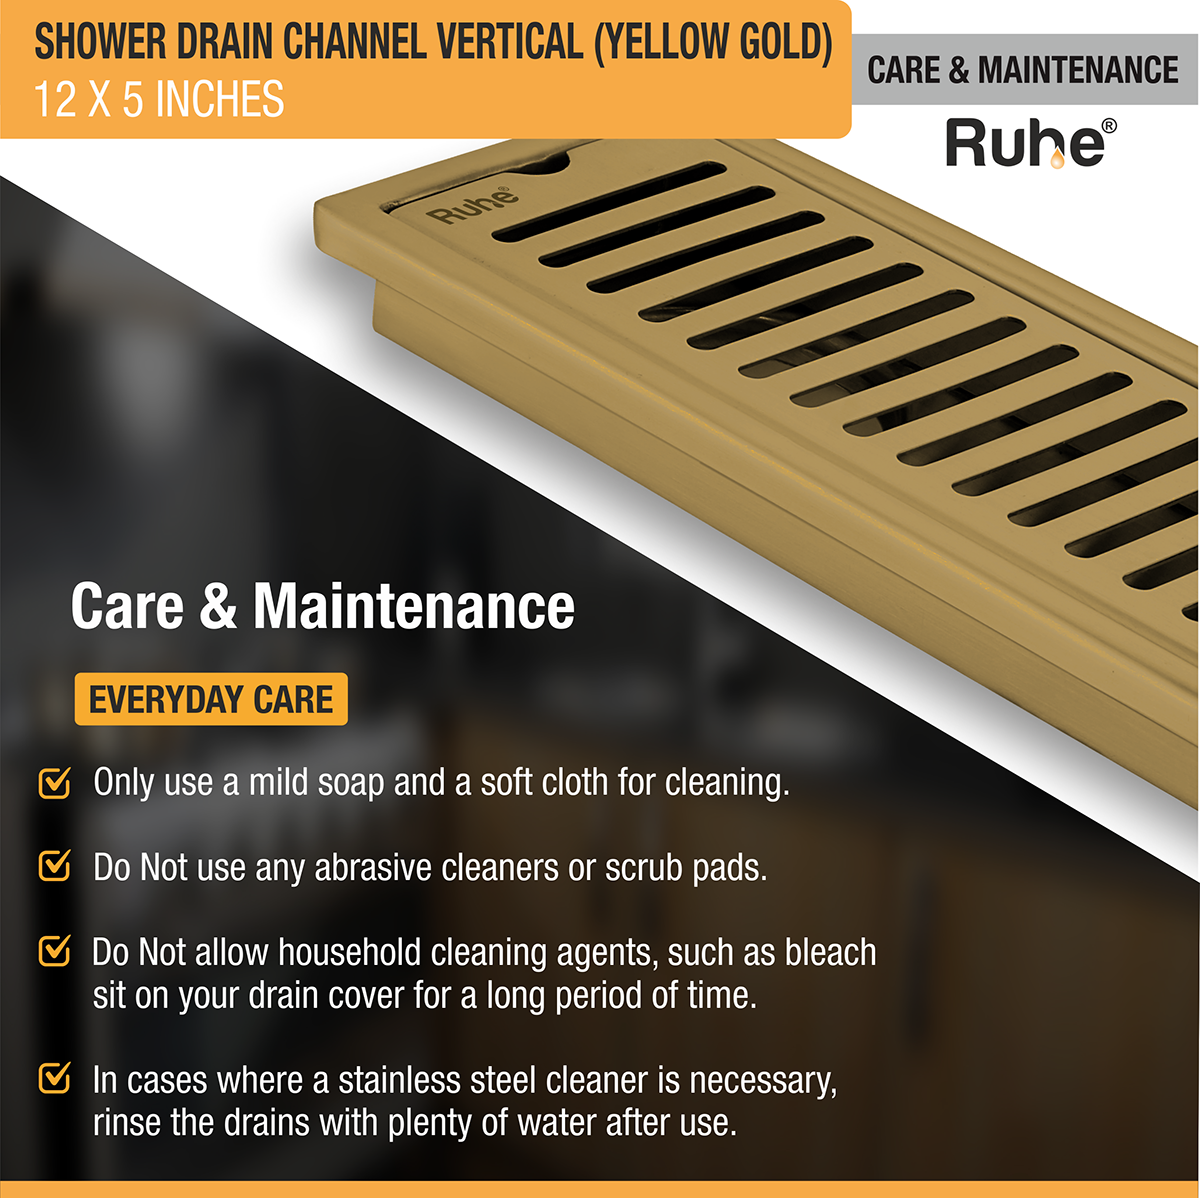 Vertical Shower Drain Channel (12 x 5 Inches) YELLOW GOLD care and maintenance